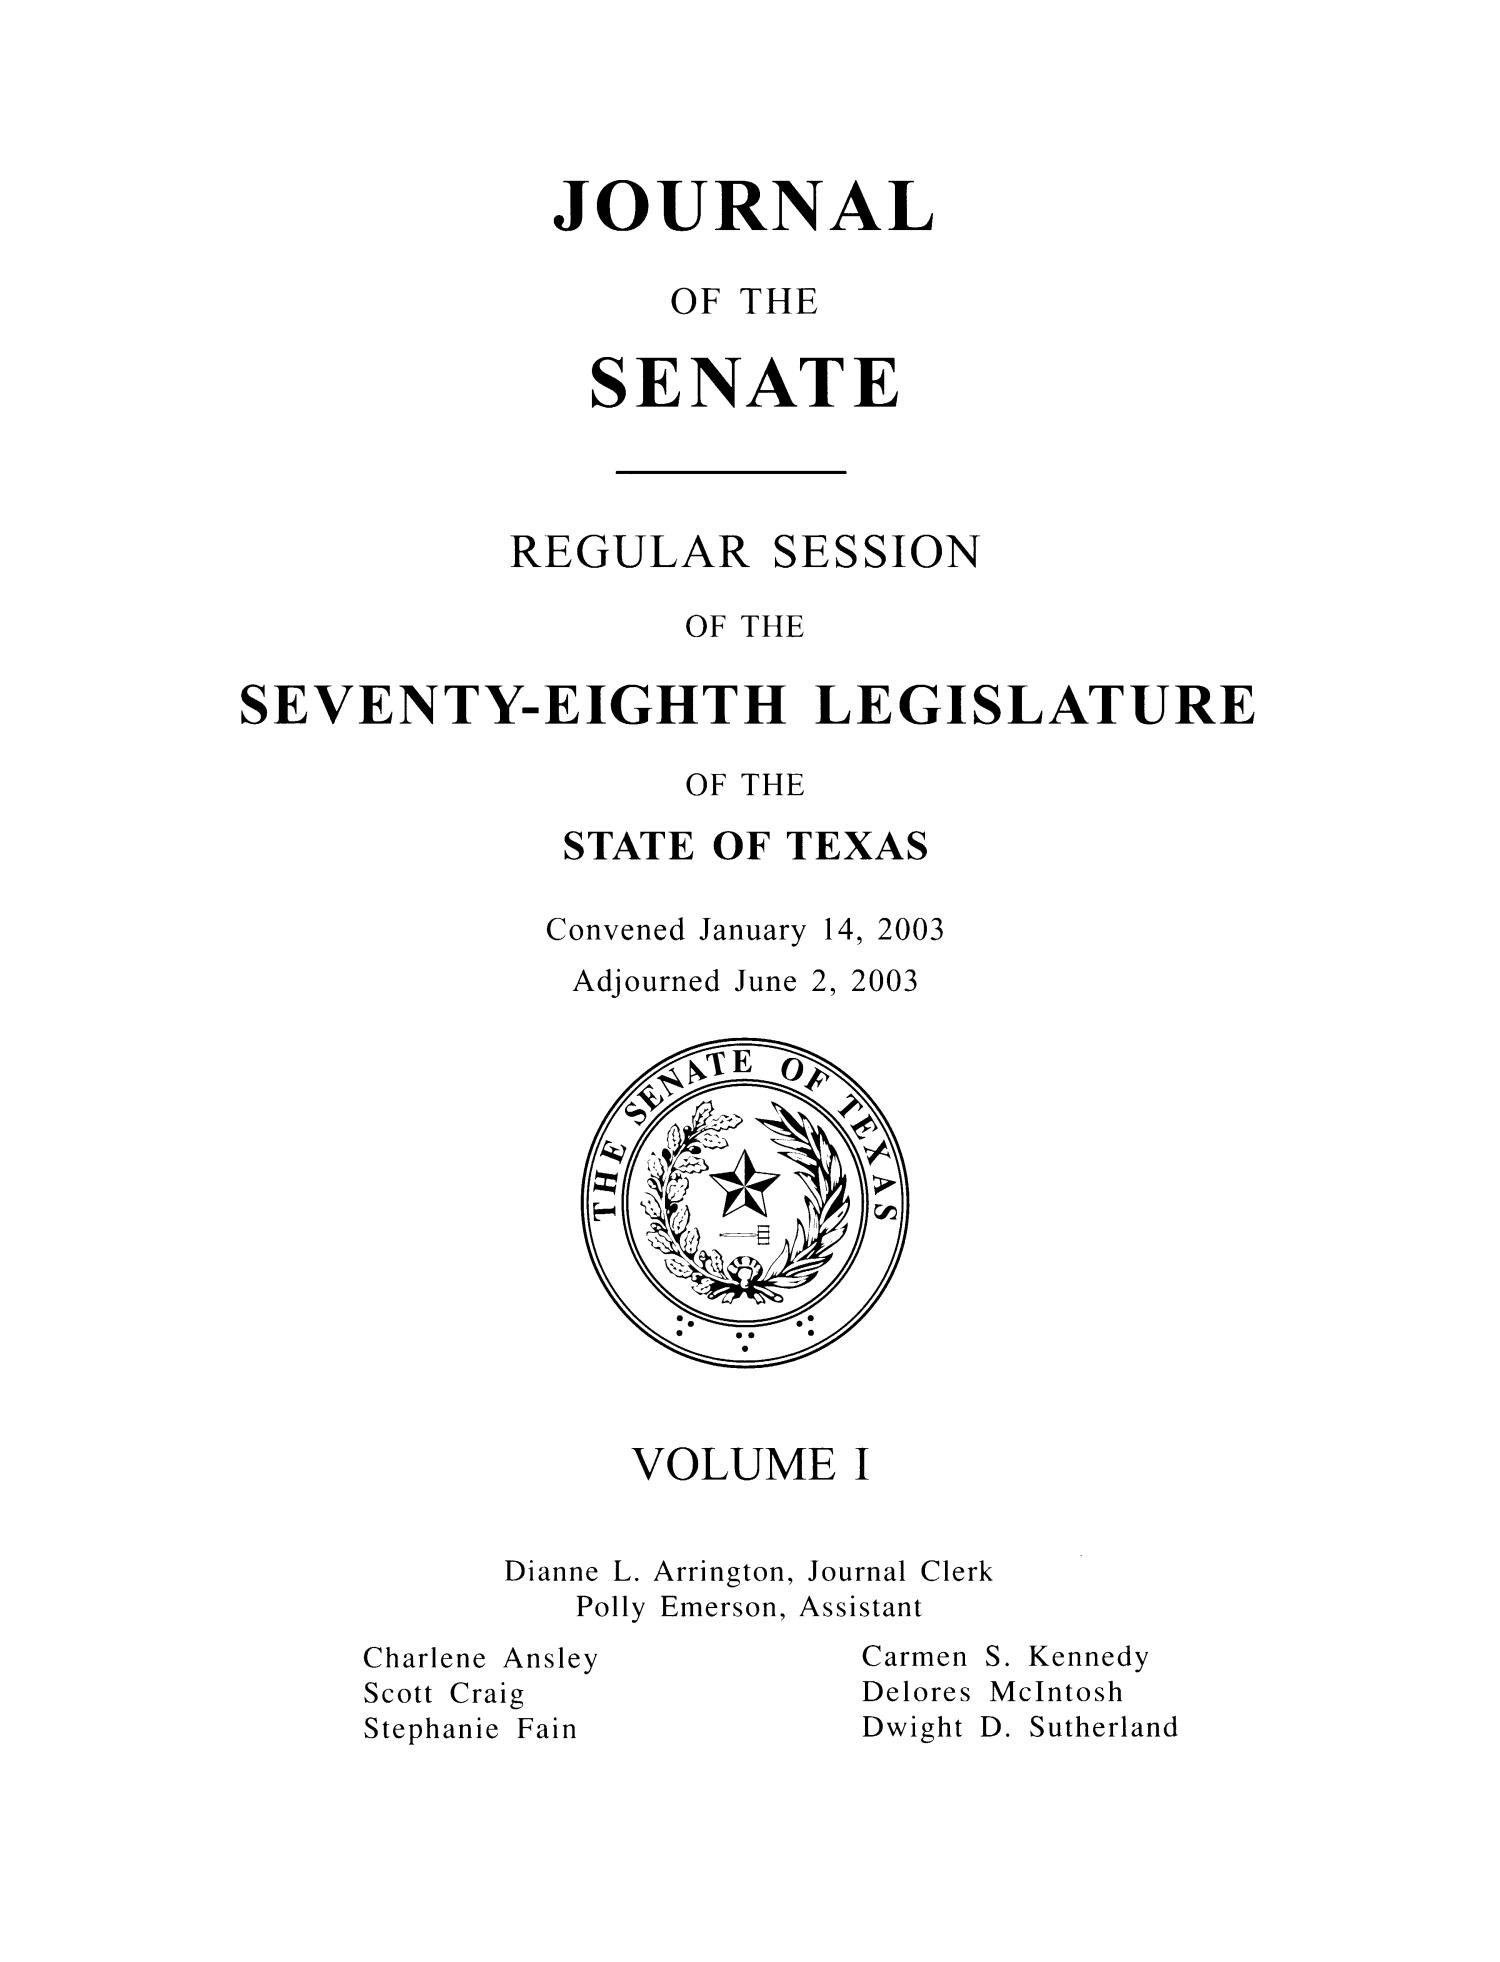 Journal of the Senate, Regular Session of the Seventy-Eighth Legislature of the State of Texas, Volume 1
                                                
                                                    Title Page
                                                